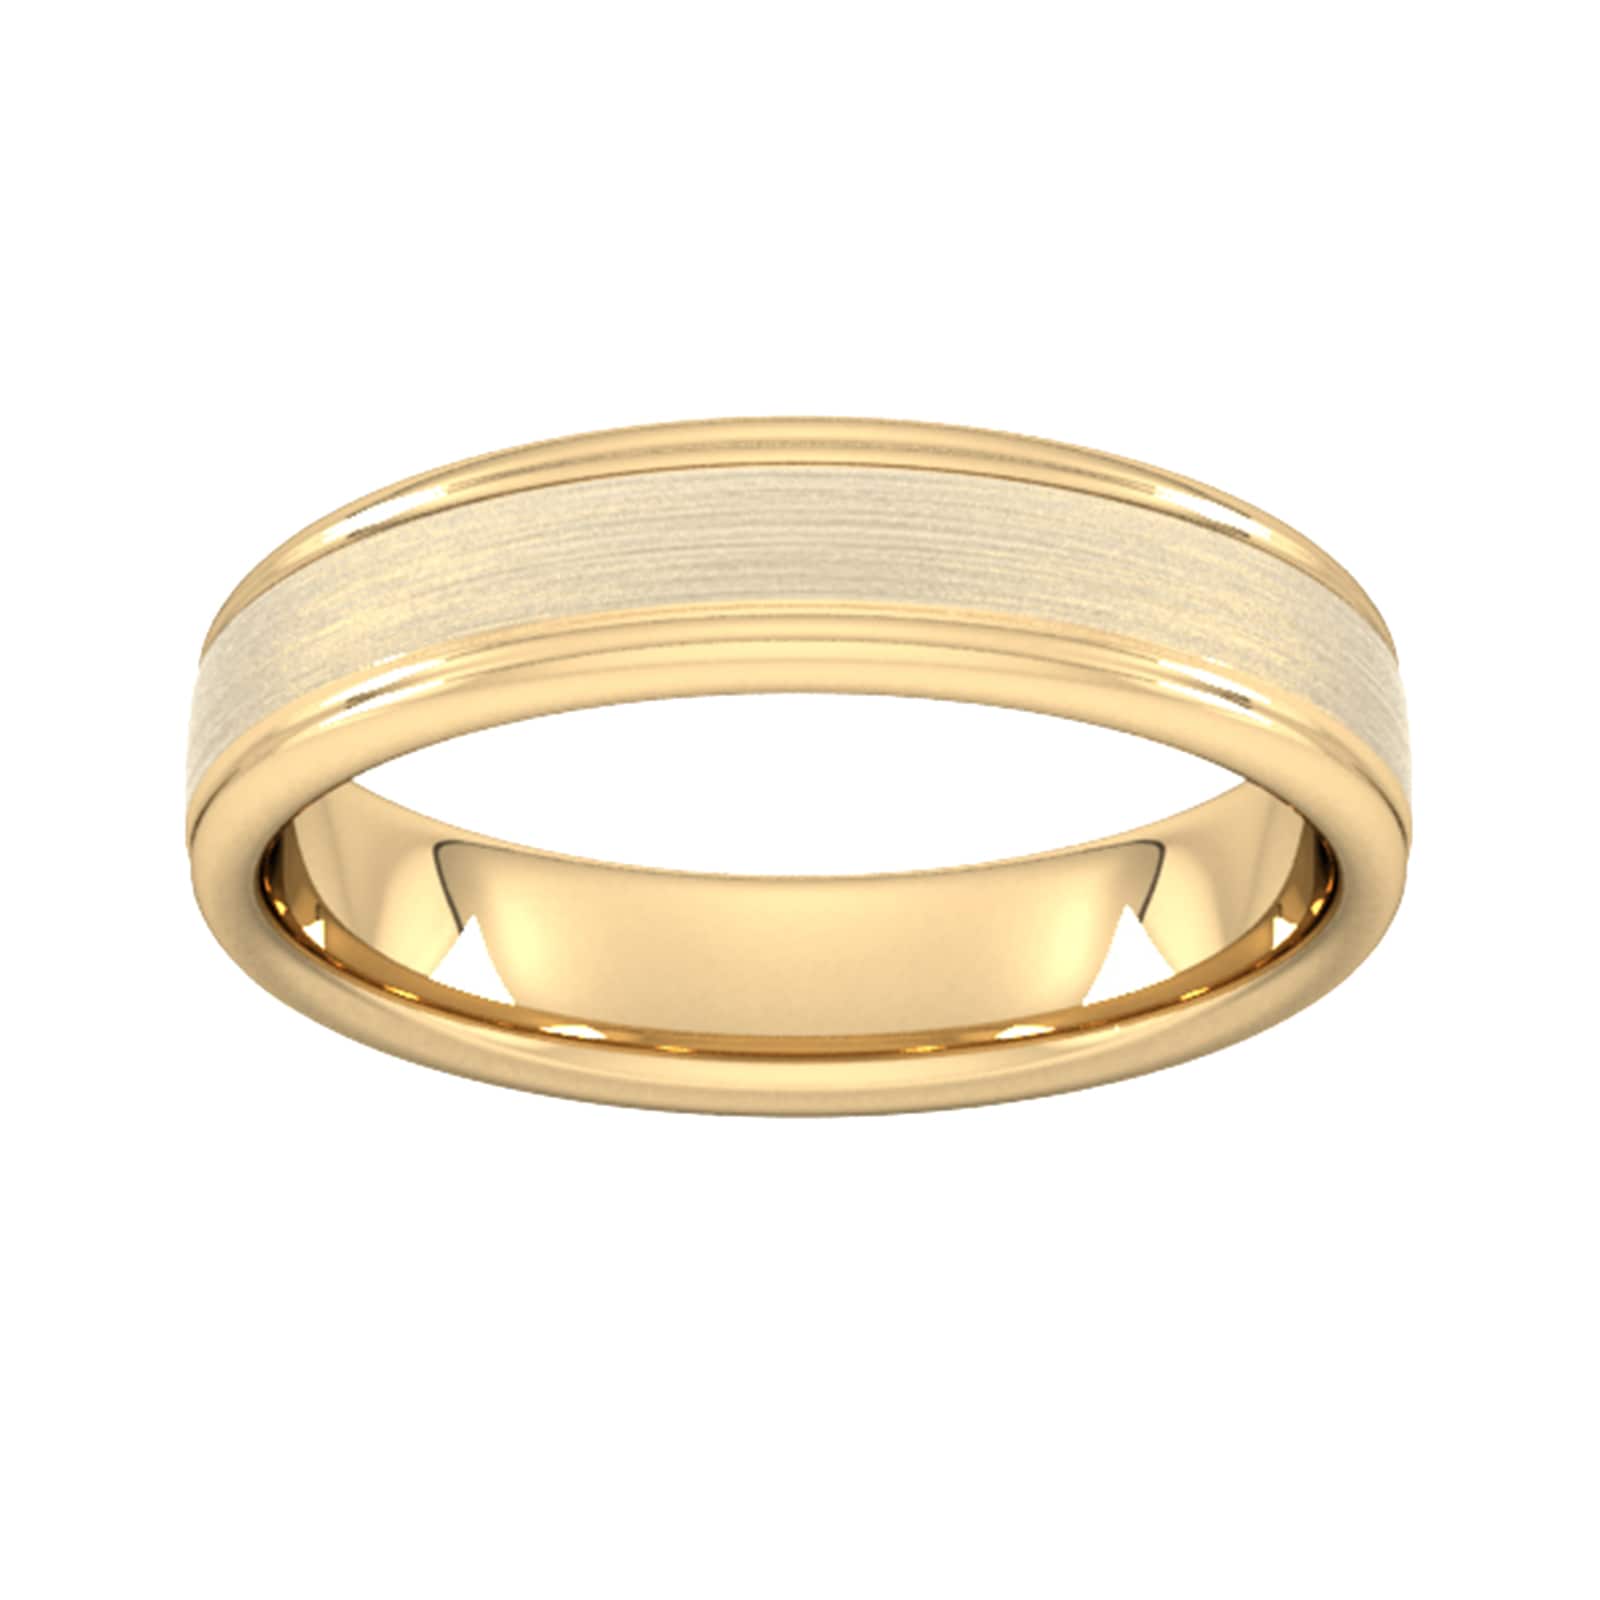 5mm D Shape Standard Matt Centre With Grooves Wedding Ring In 18 Carat Yellow Gold - Ring Size S